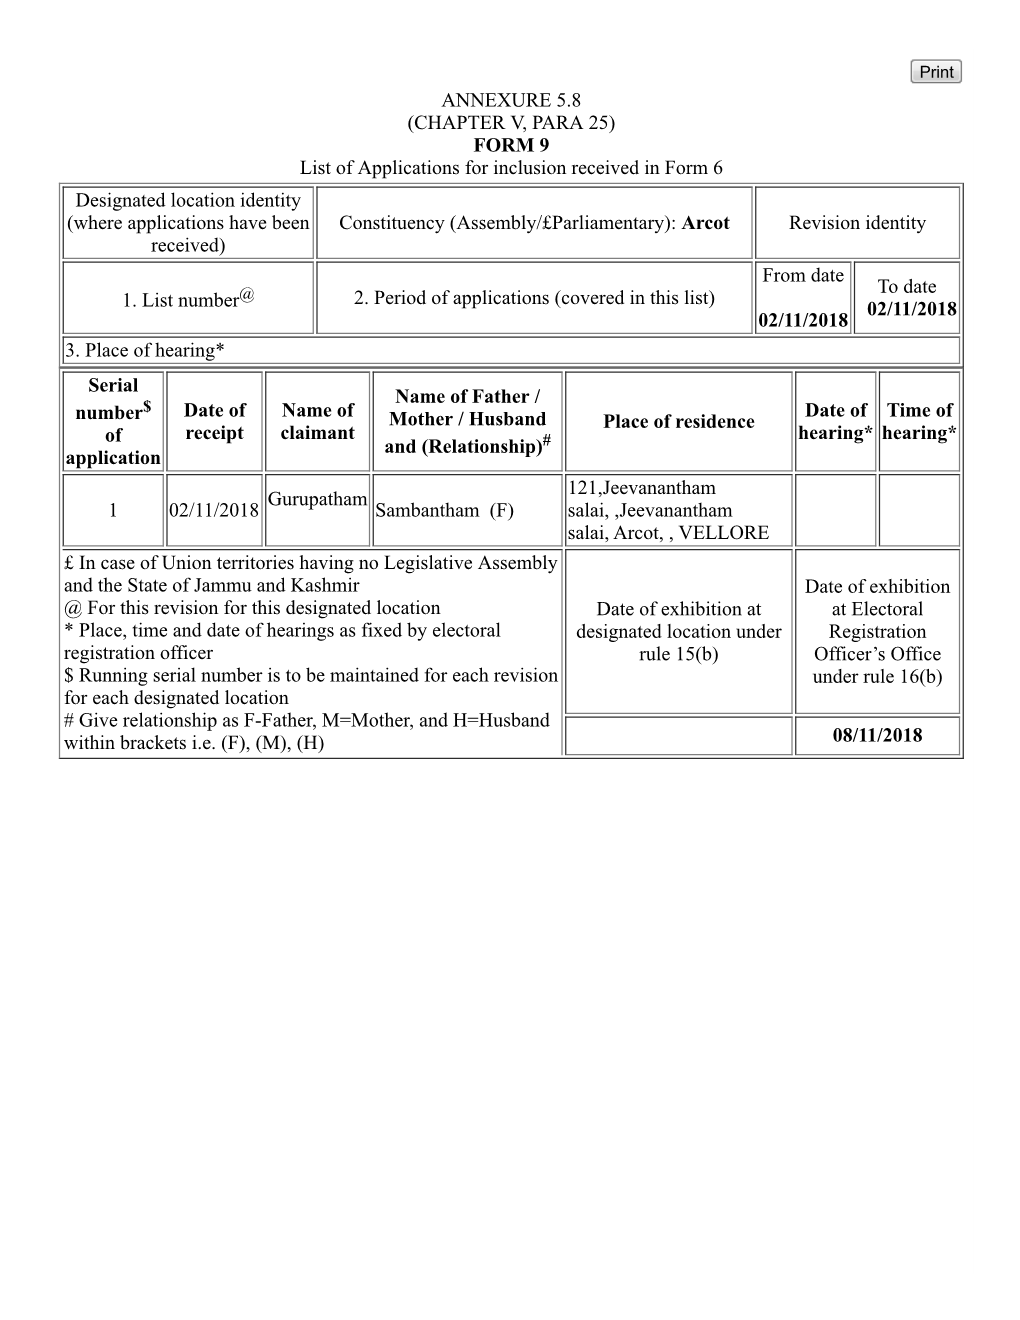 Annexure 5.8 (Chapter V, Para 25) Form 9